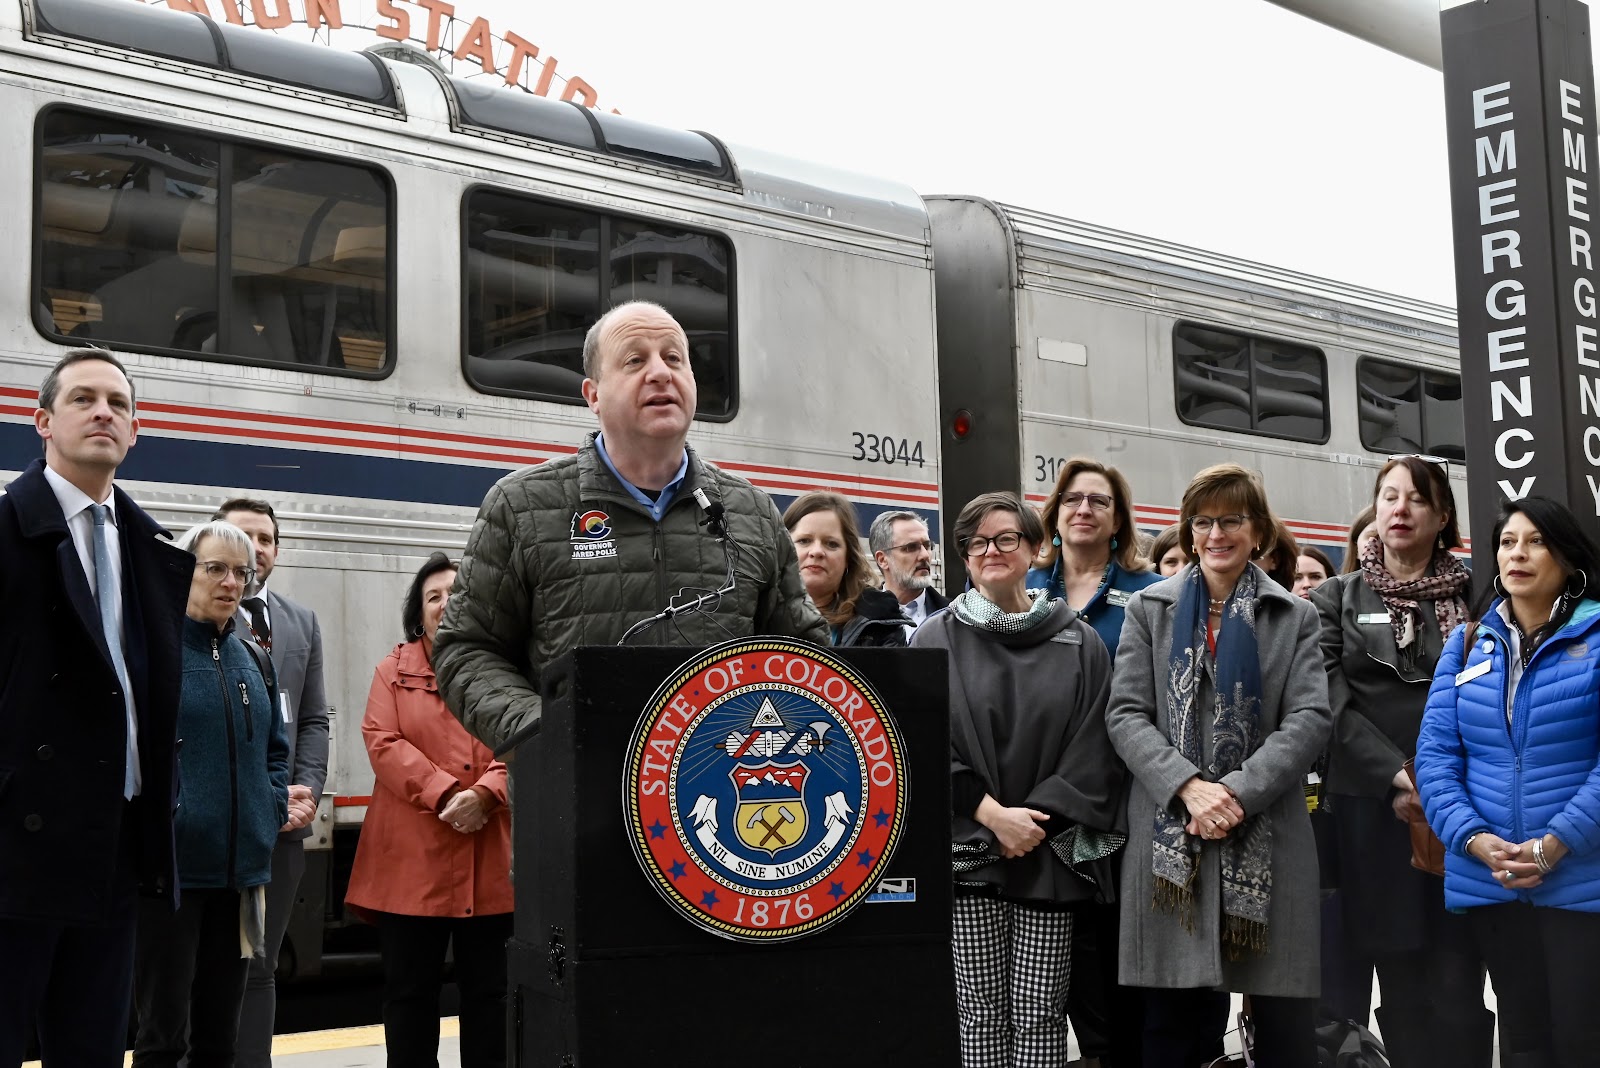 Governor Polis speaks at Union Station in Denver to a crowd in front of a train before leaving for Longmont.